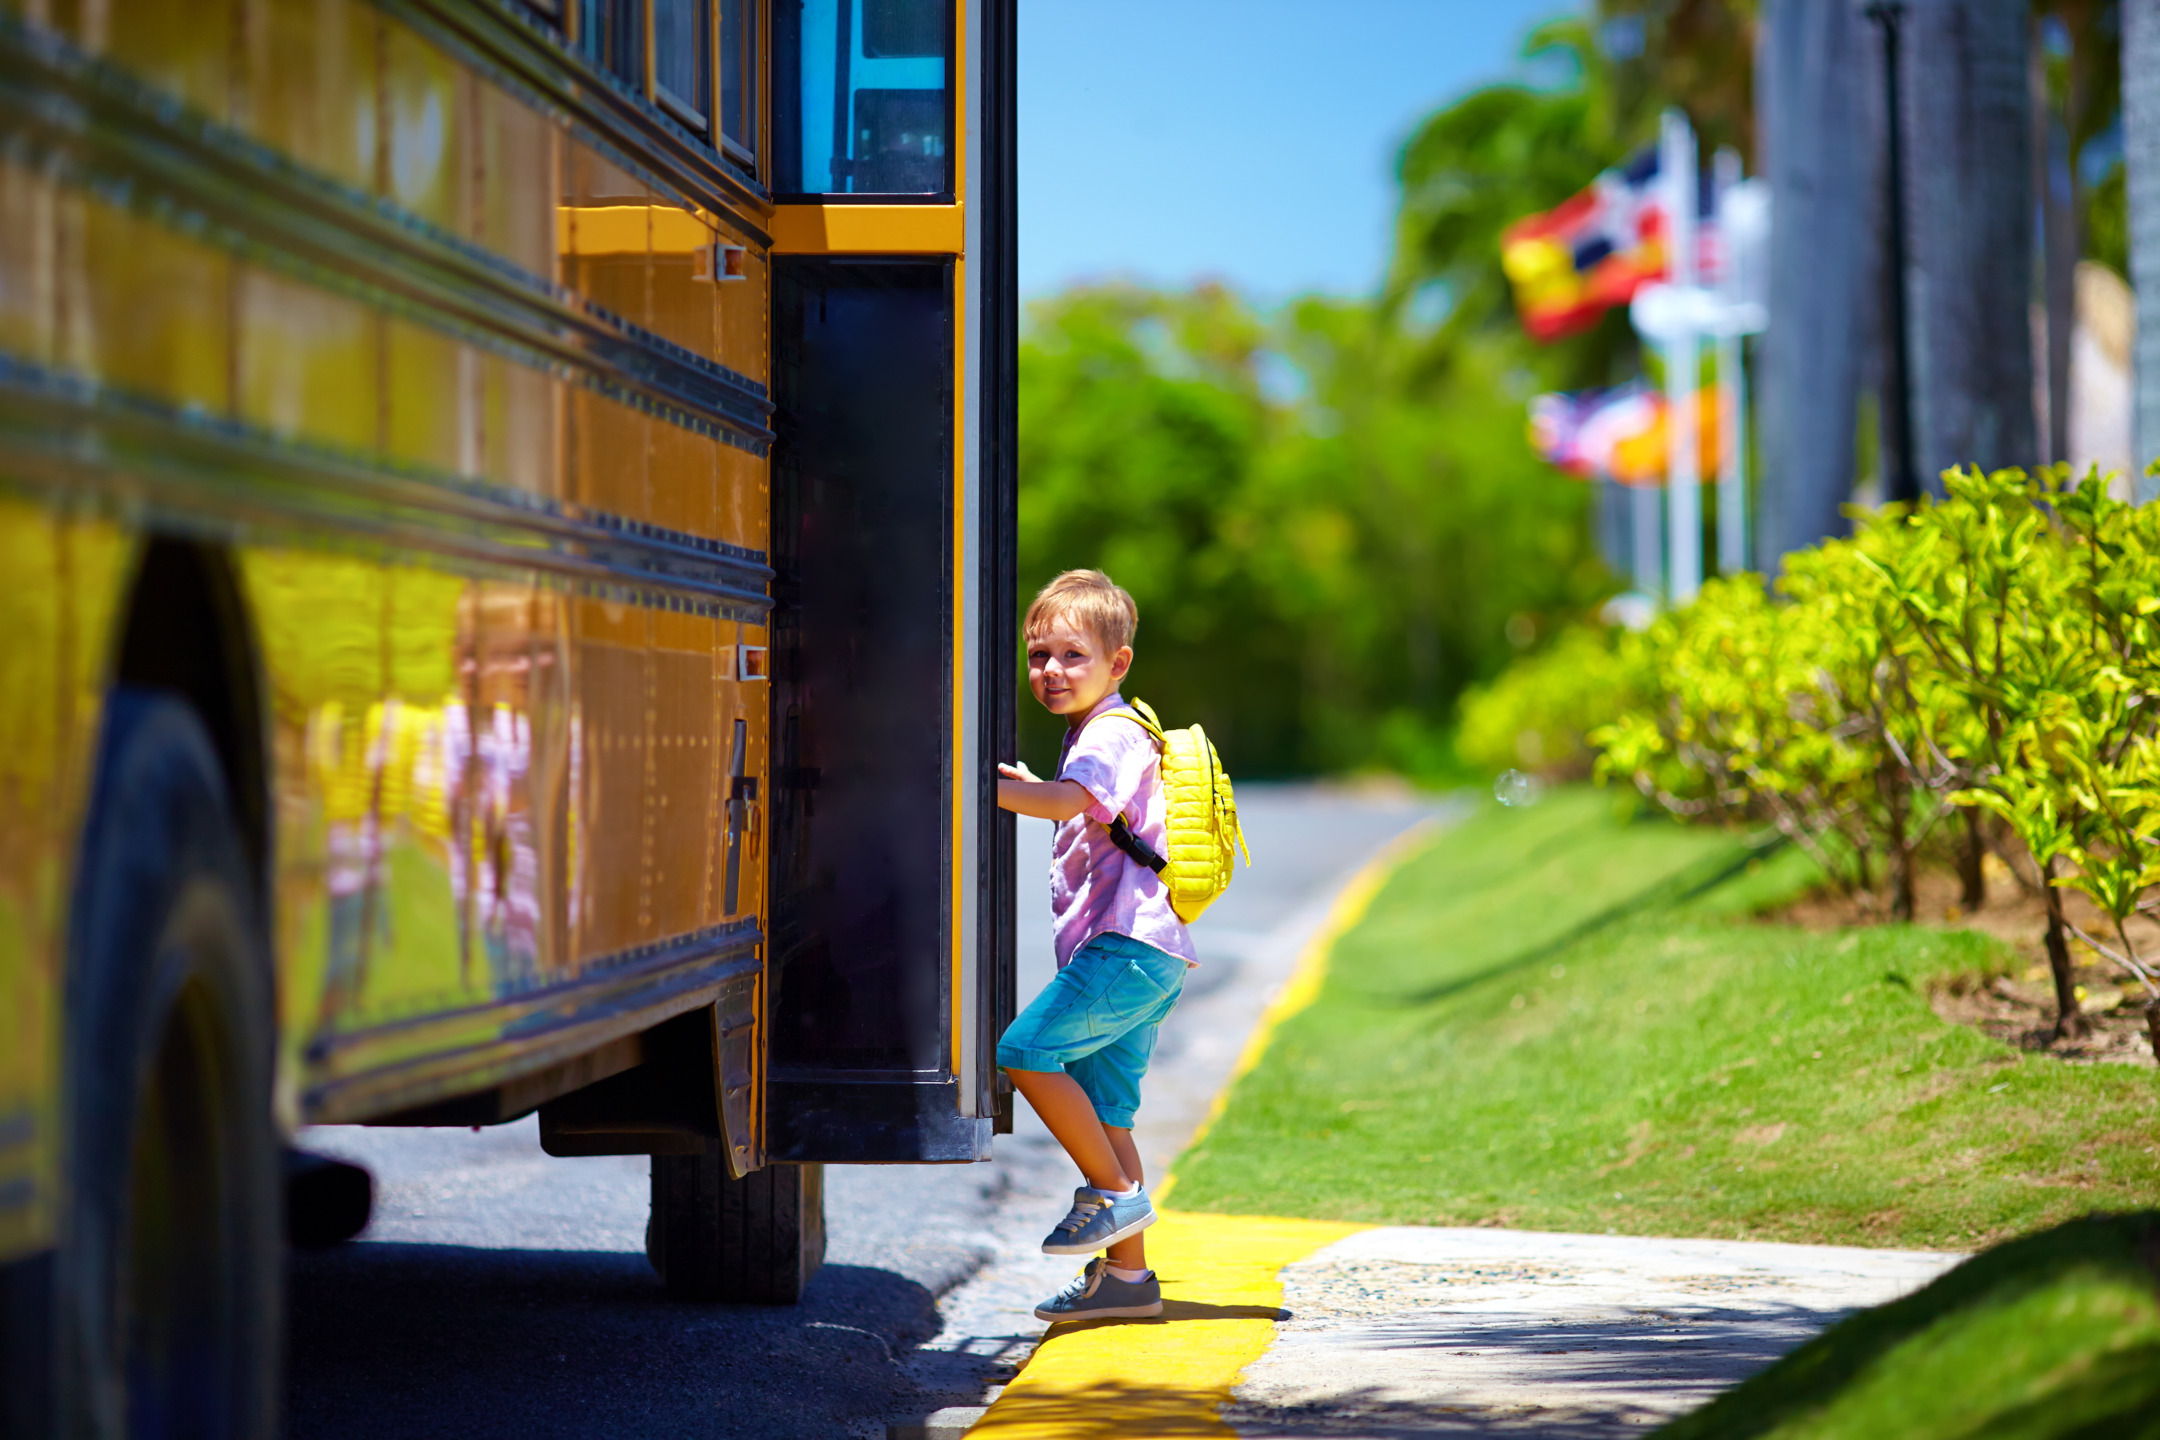 Anxious child getting on school bus